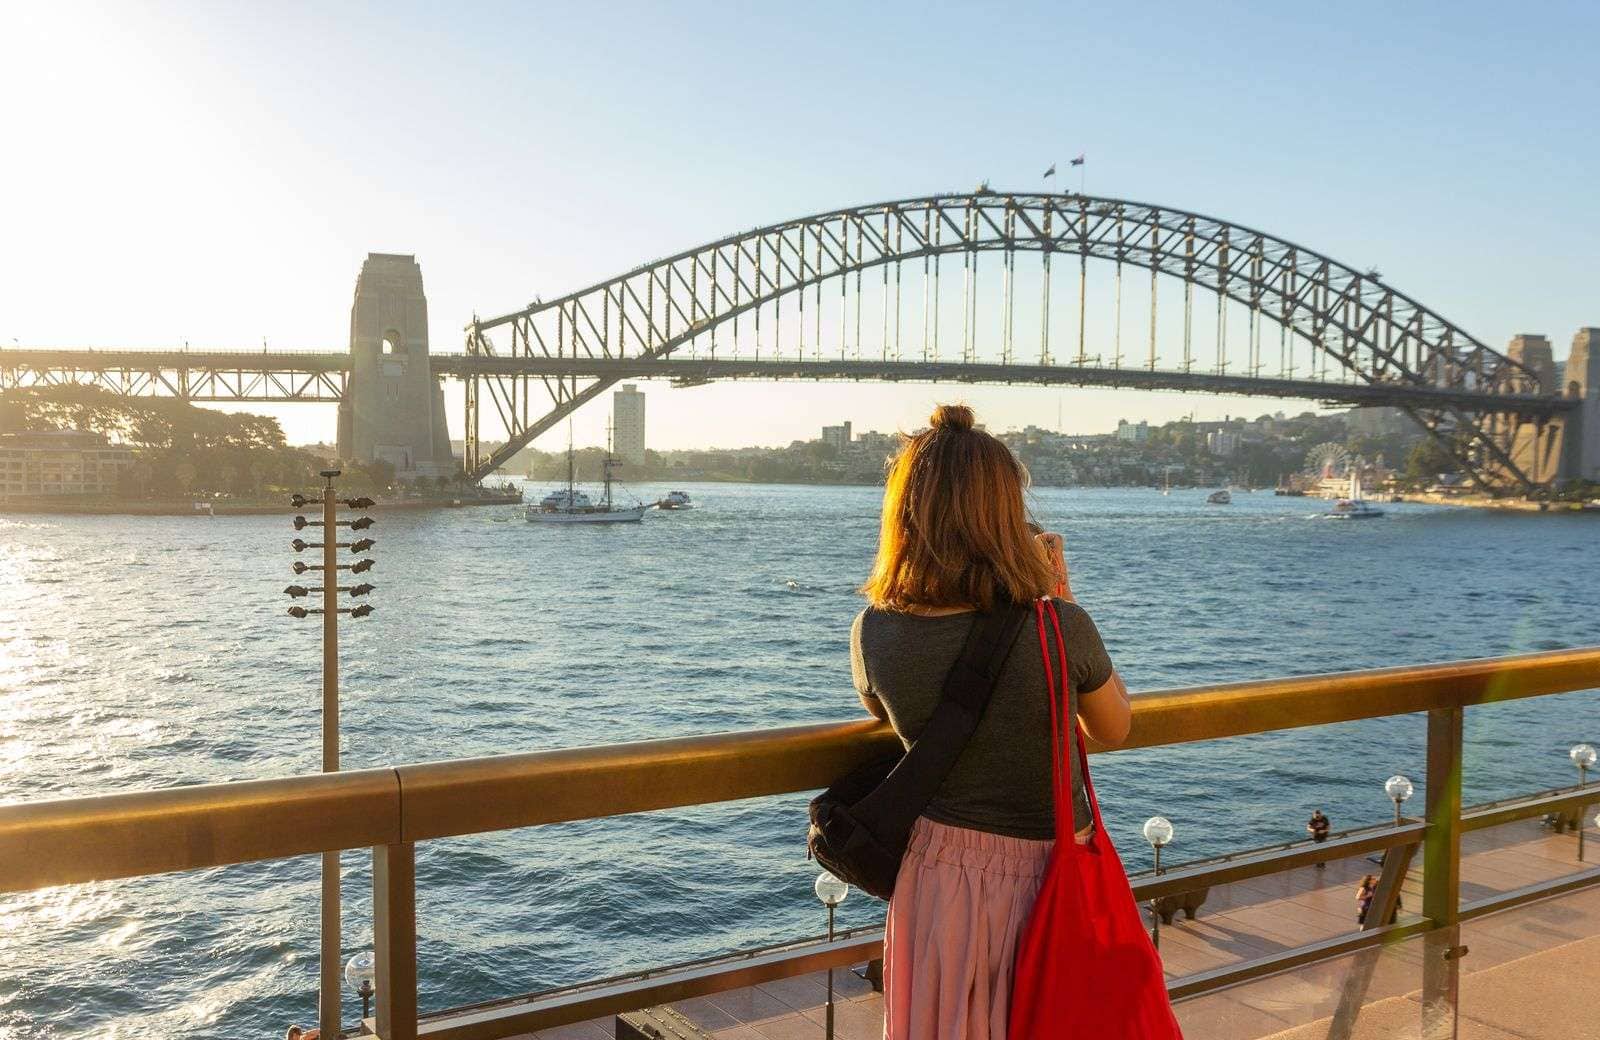 A woman taking a picture of the Sydney bridge.